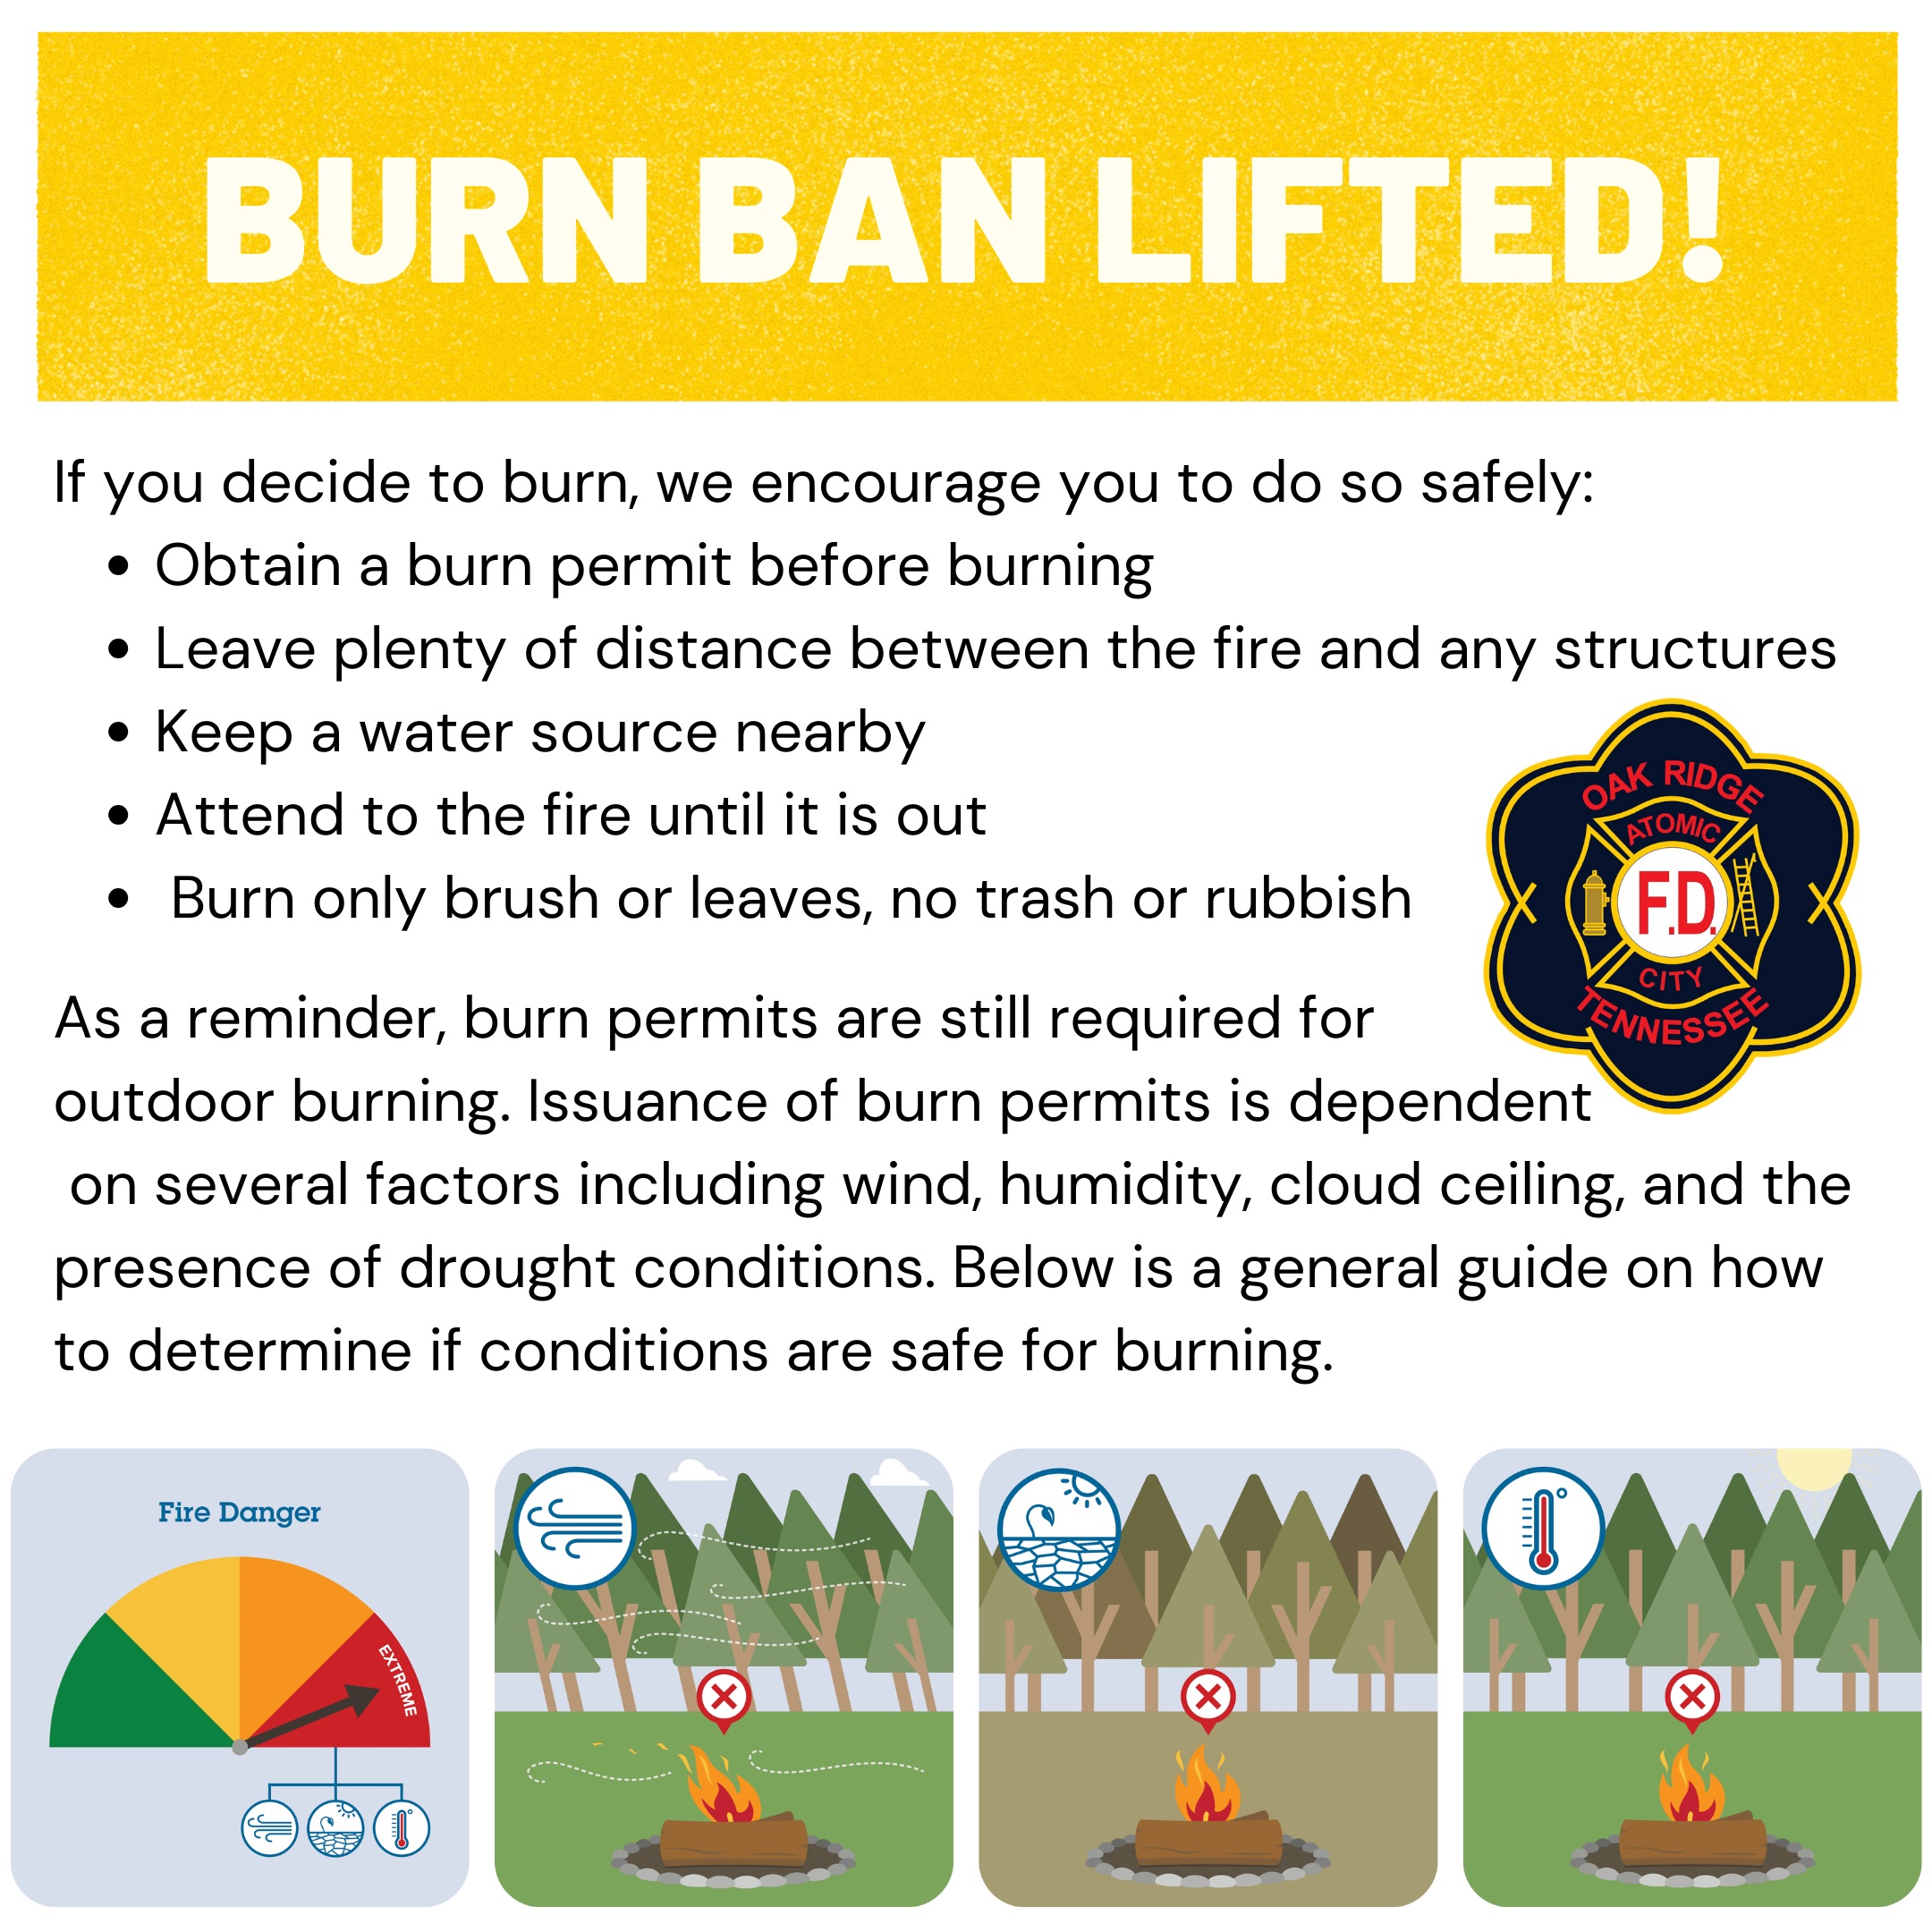 Fire Chief Travis Solomon has lifted the burn ban for the City of Oak Ridge. As a reminder, burn permits are still required for outdoor burning. Issuance of burn permits is dependent on several factors including wind, humidity, cloud ceiling, and the presence of drought conditions. The battalion chief makes the daily determination regarding burn permits with these factors in mind. The lifted burn ban does not guarantee a burn permit will be issued. If prolonged dry weather conditions return, the burn ban may be reinstated.  If you decide to burn, we encourage you to do so safely: • Obtain a burn permit before burning • Leave plenty of distance between the fire and any structures • Keep a water source nearby • Attend to the fire until it is out • Burn only brush or leaves, no trash or rubbish